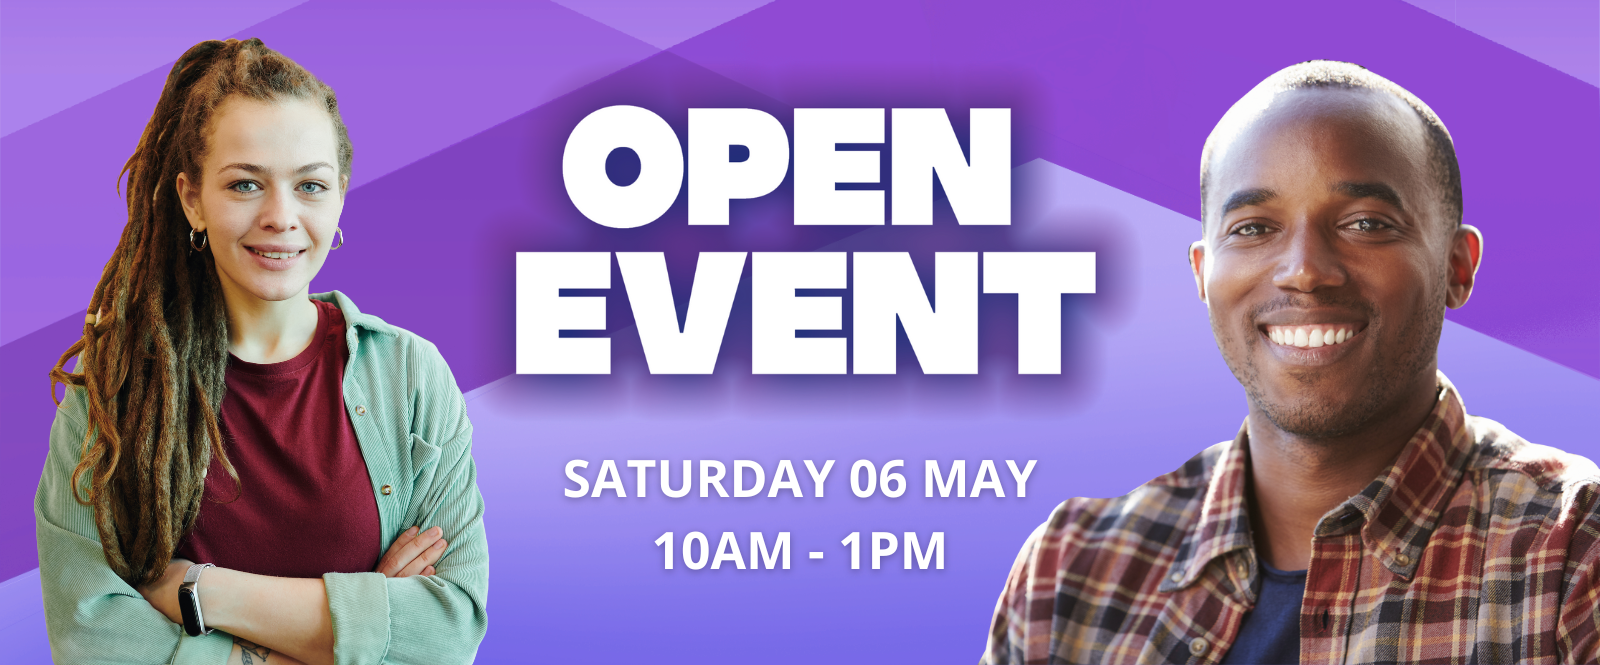 Open Event - Saturday 06 May